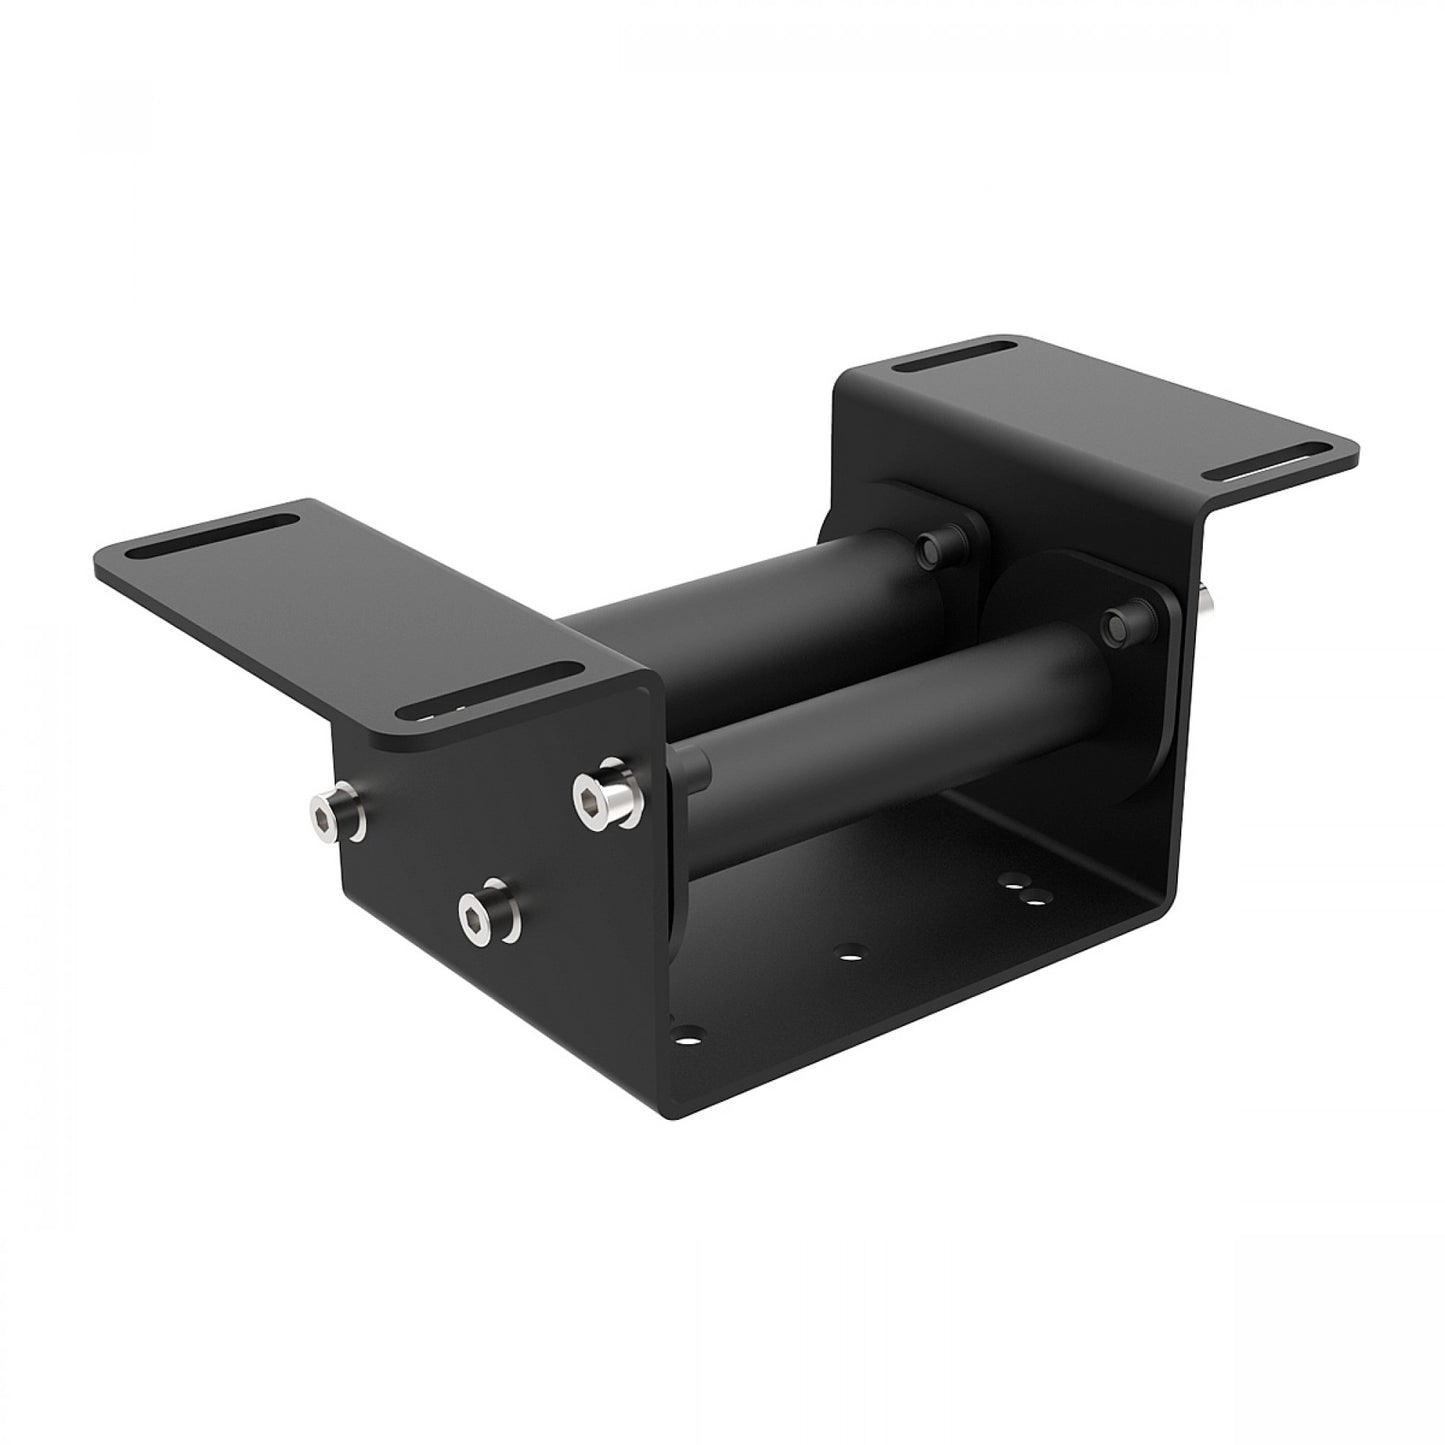 Support Buttkicker pour RSeat B1 / C1 / P1